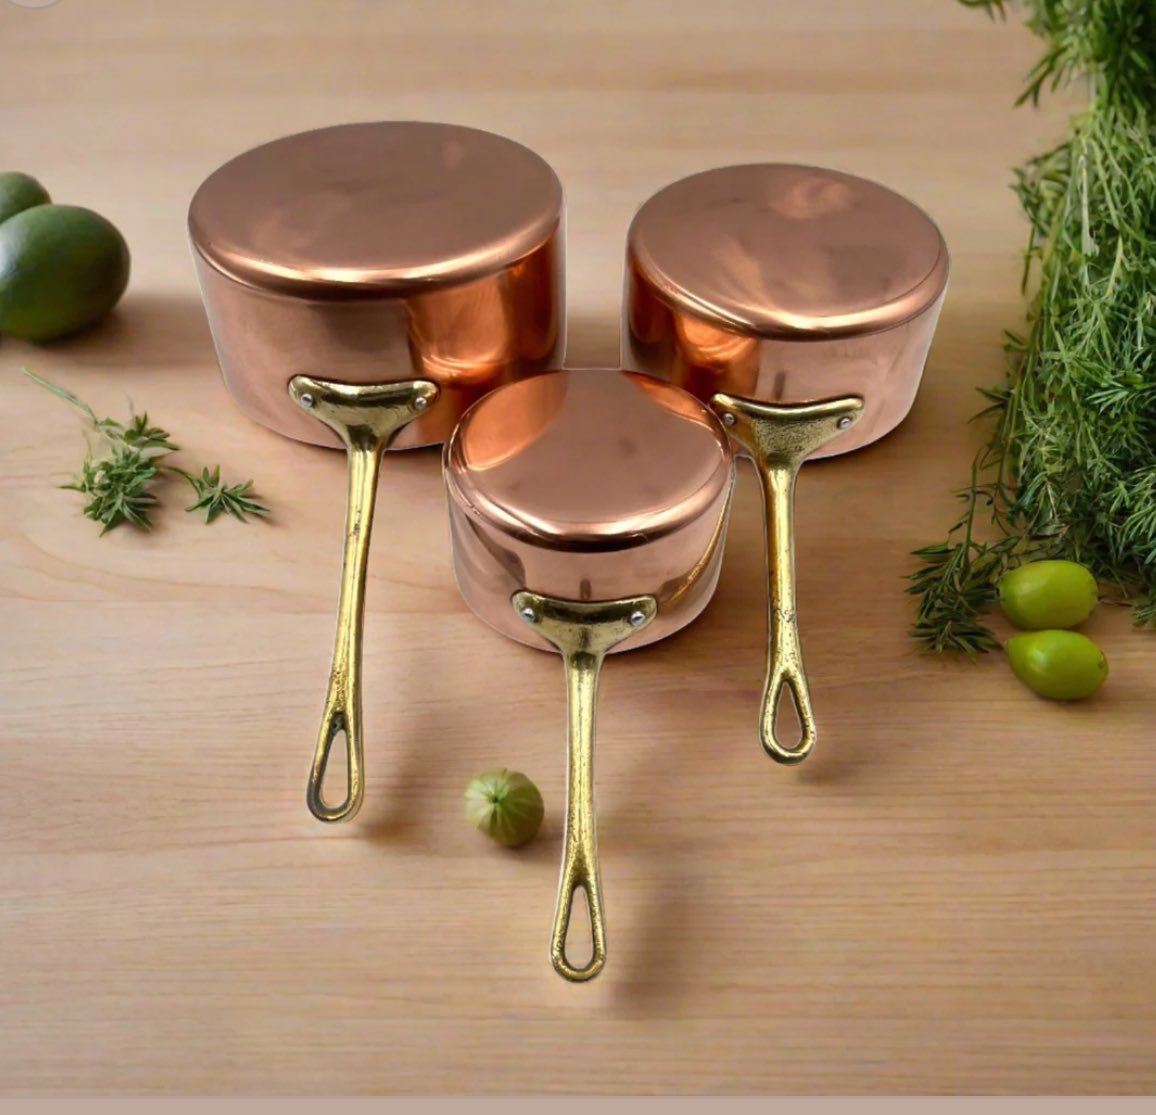 French copper pan set £42.99 free postage #buyvintage #allthingsfrenchstore #frenchcopper allthingsfrenchstore.com/products/frenc…